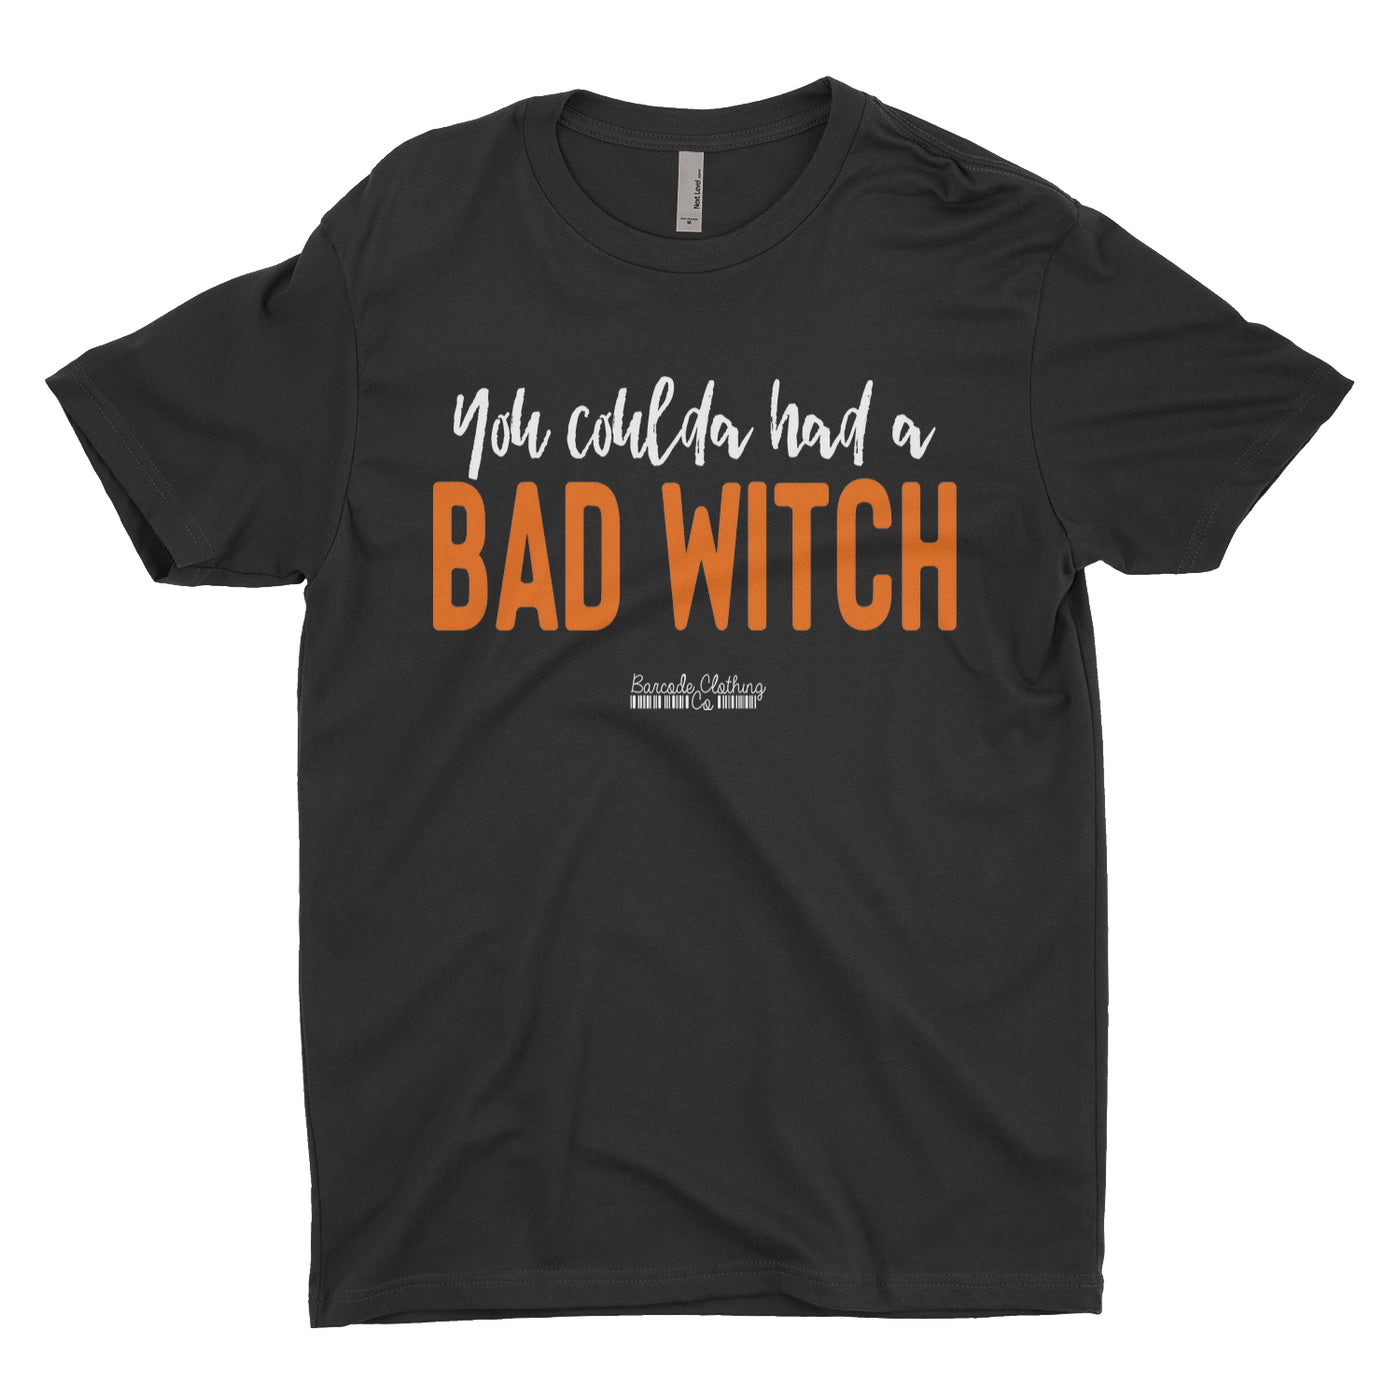 Coulda Bad Witch